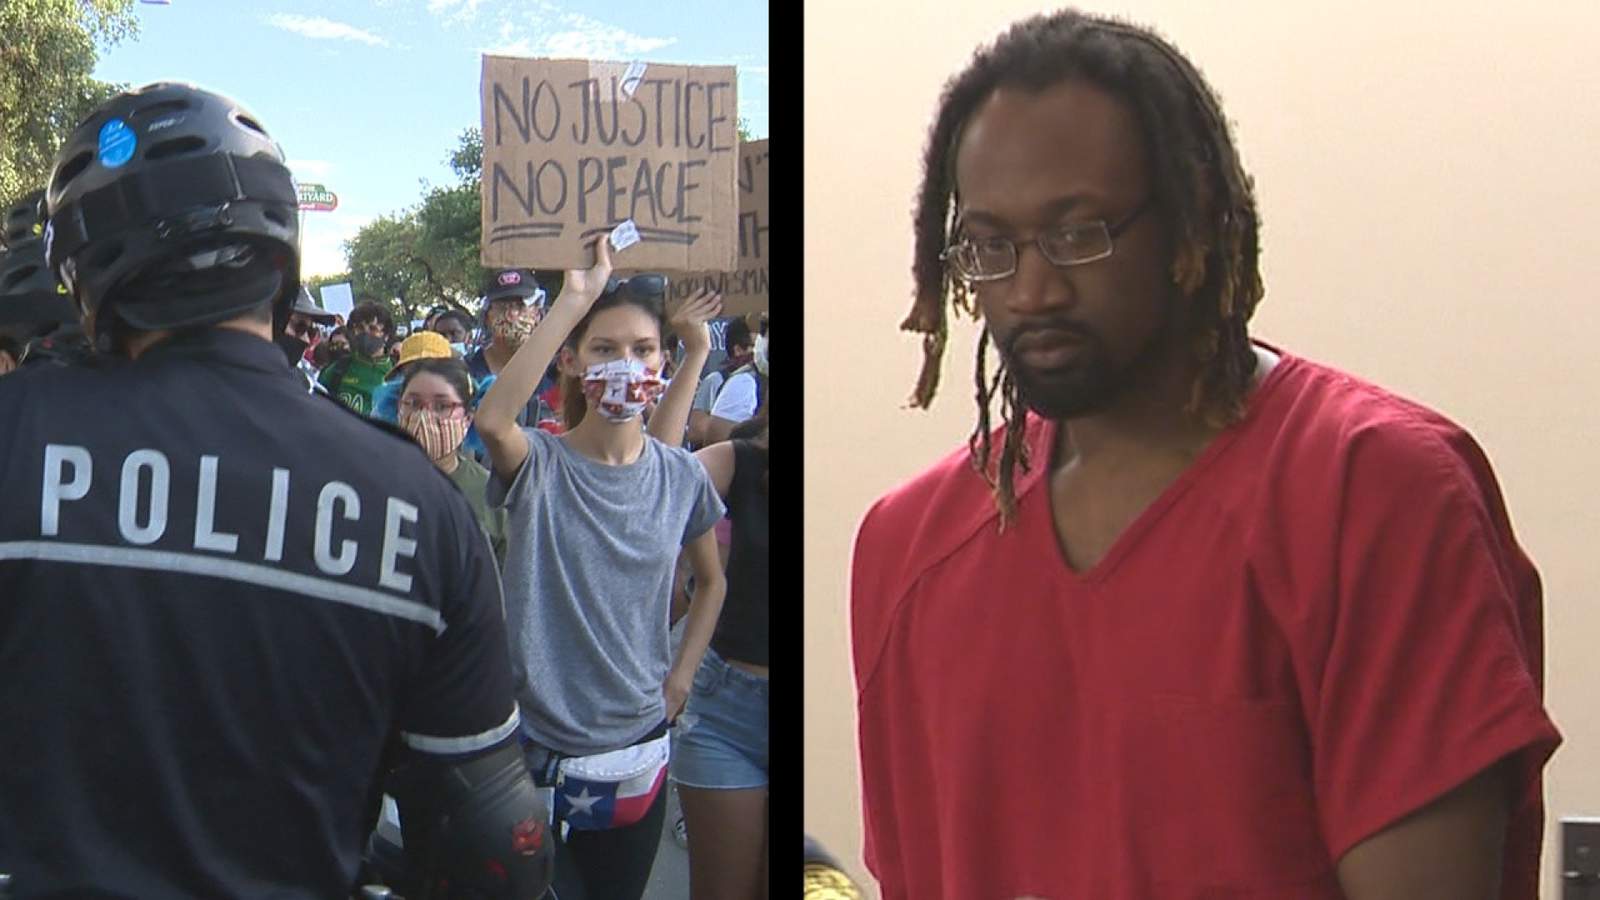 Police reform demonstrations to play role in accused cop killer’s trial in San Antonio